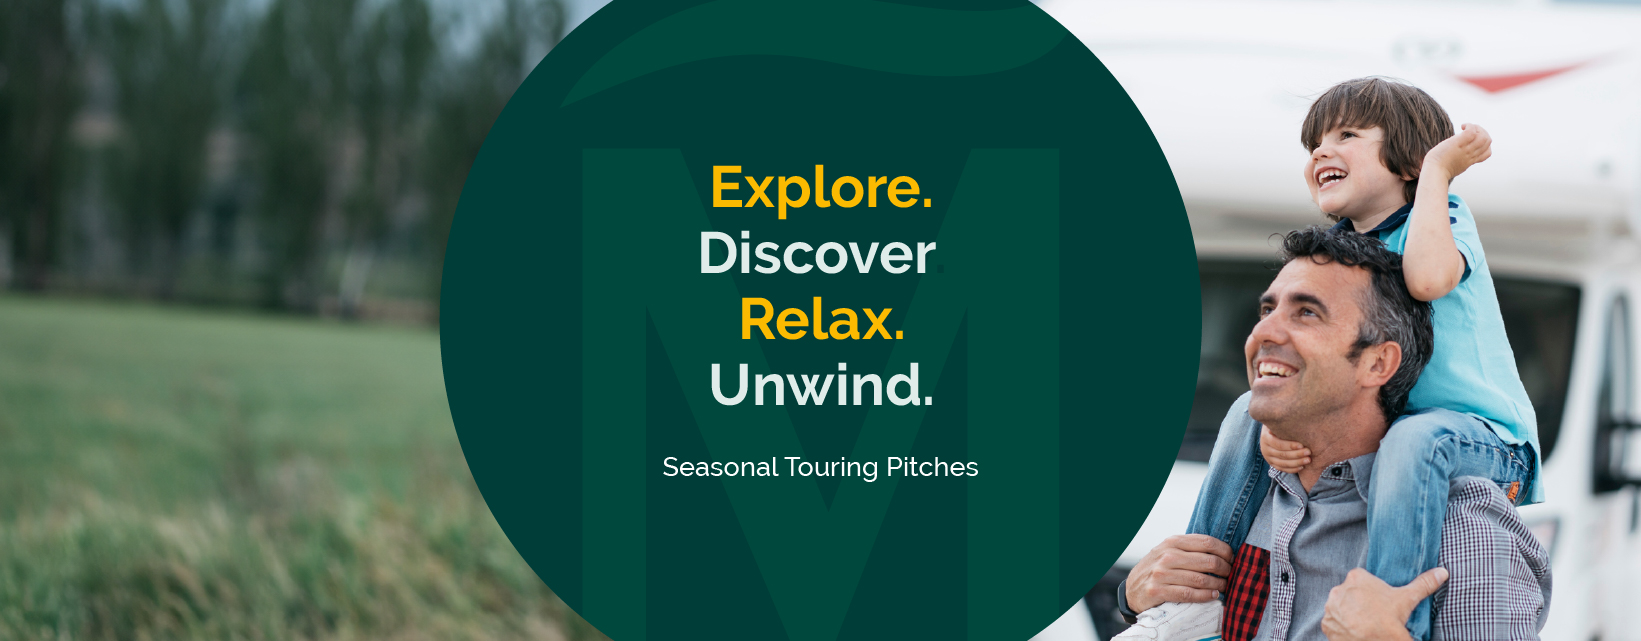 Explore. Discover, Relax, Unwind. Seasonal Touring Pitches.